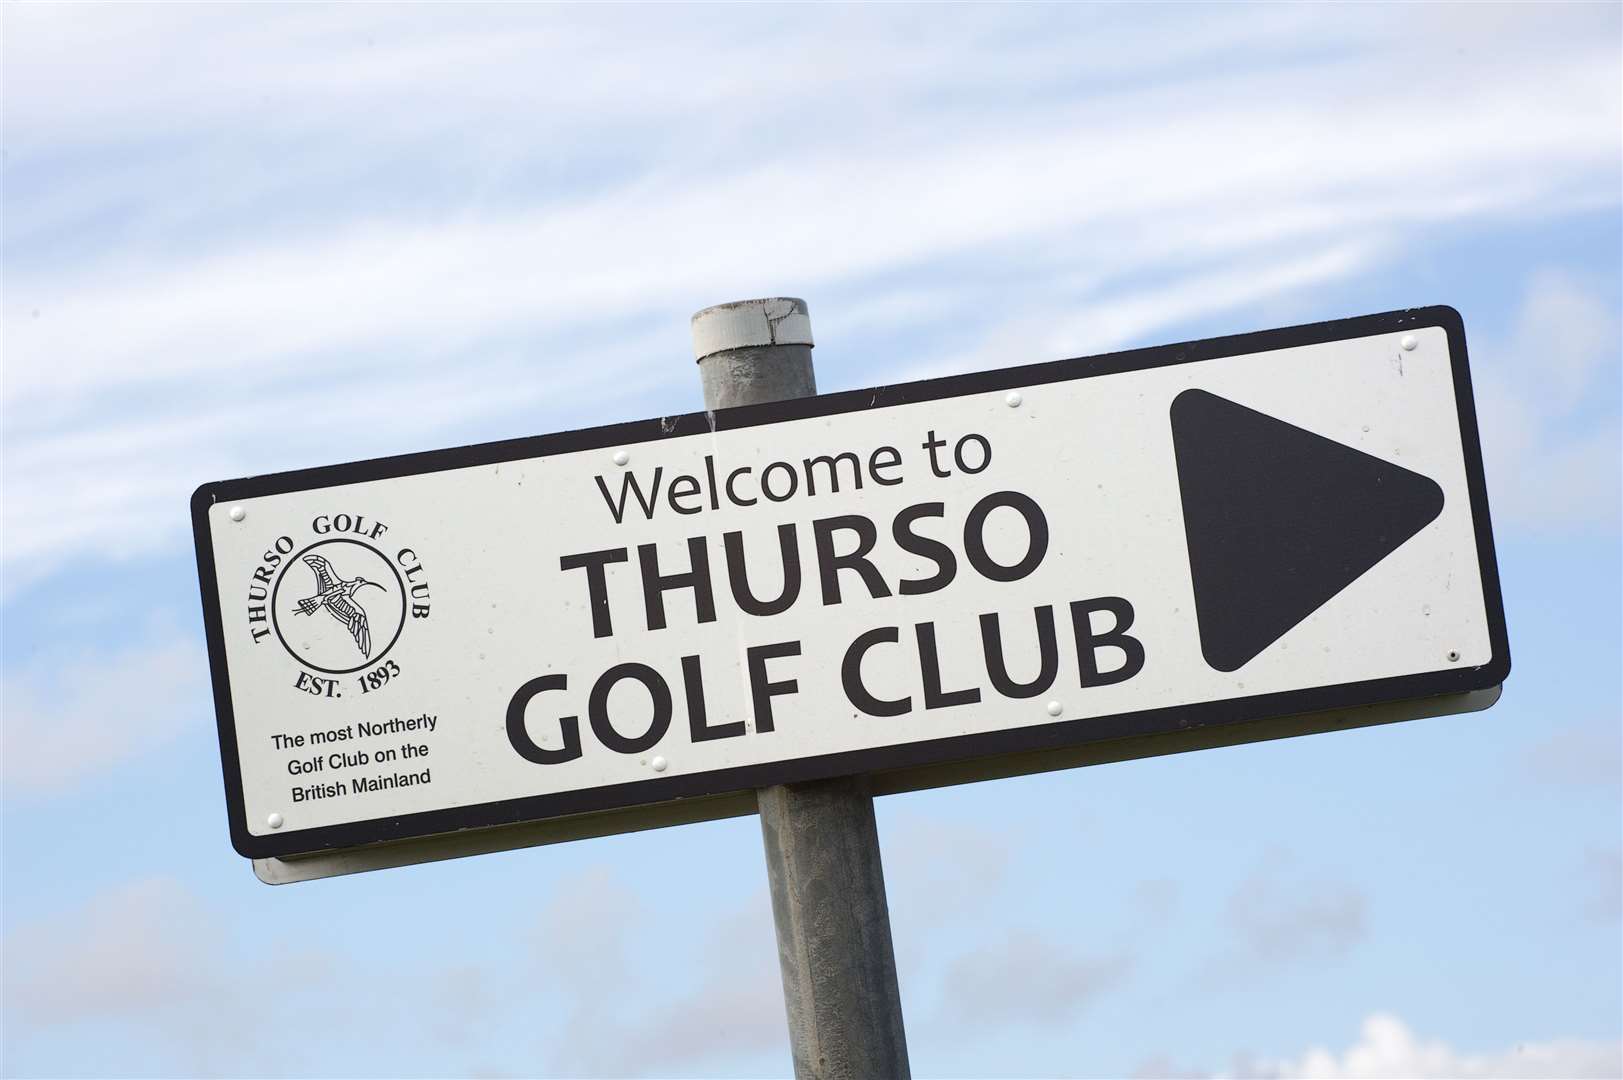 The season will continue this weekend at Thurso.